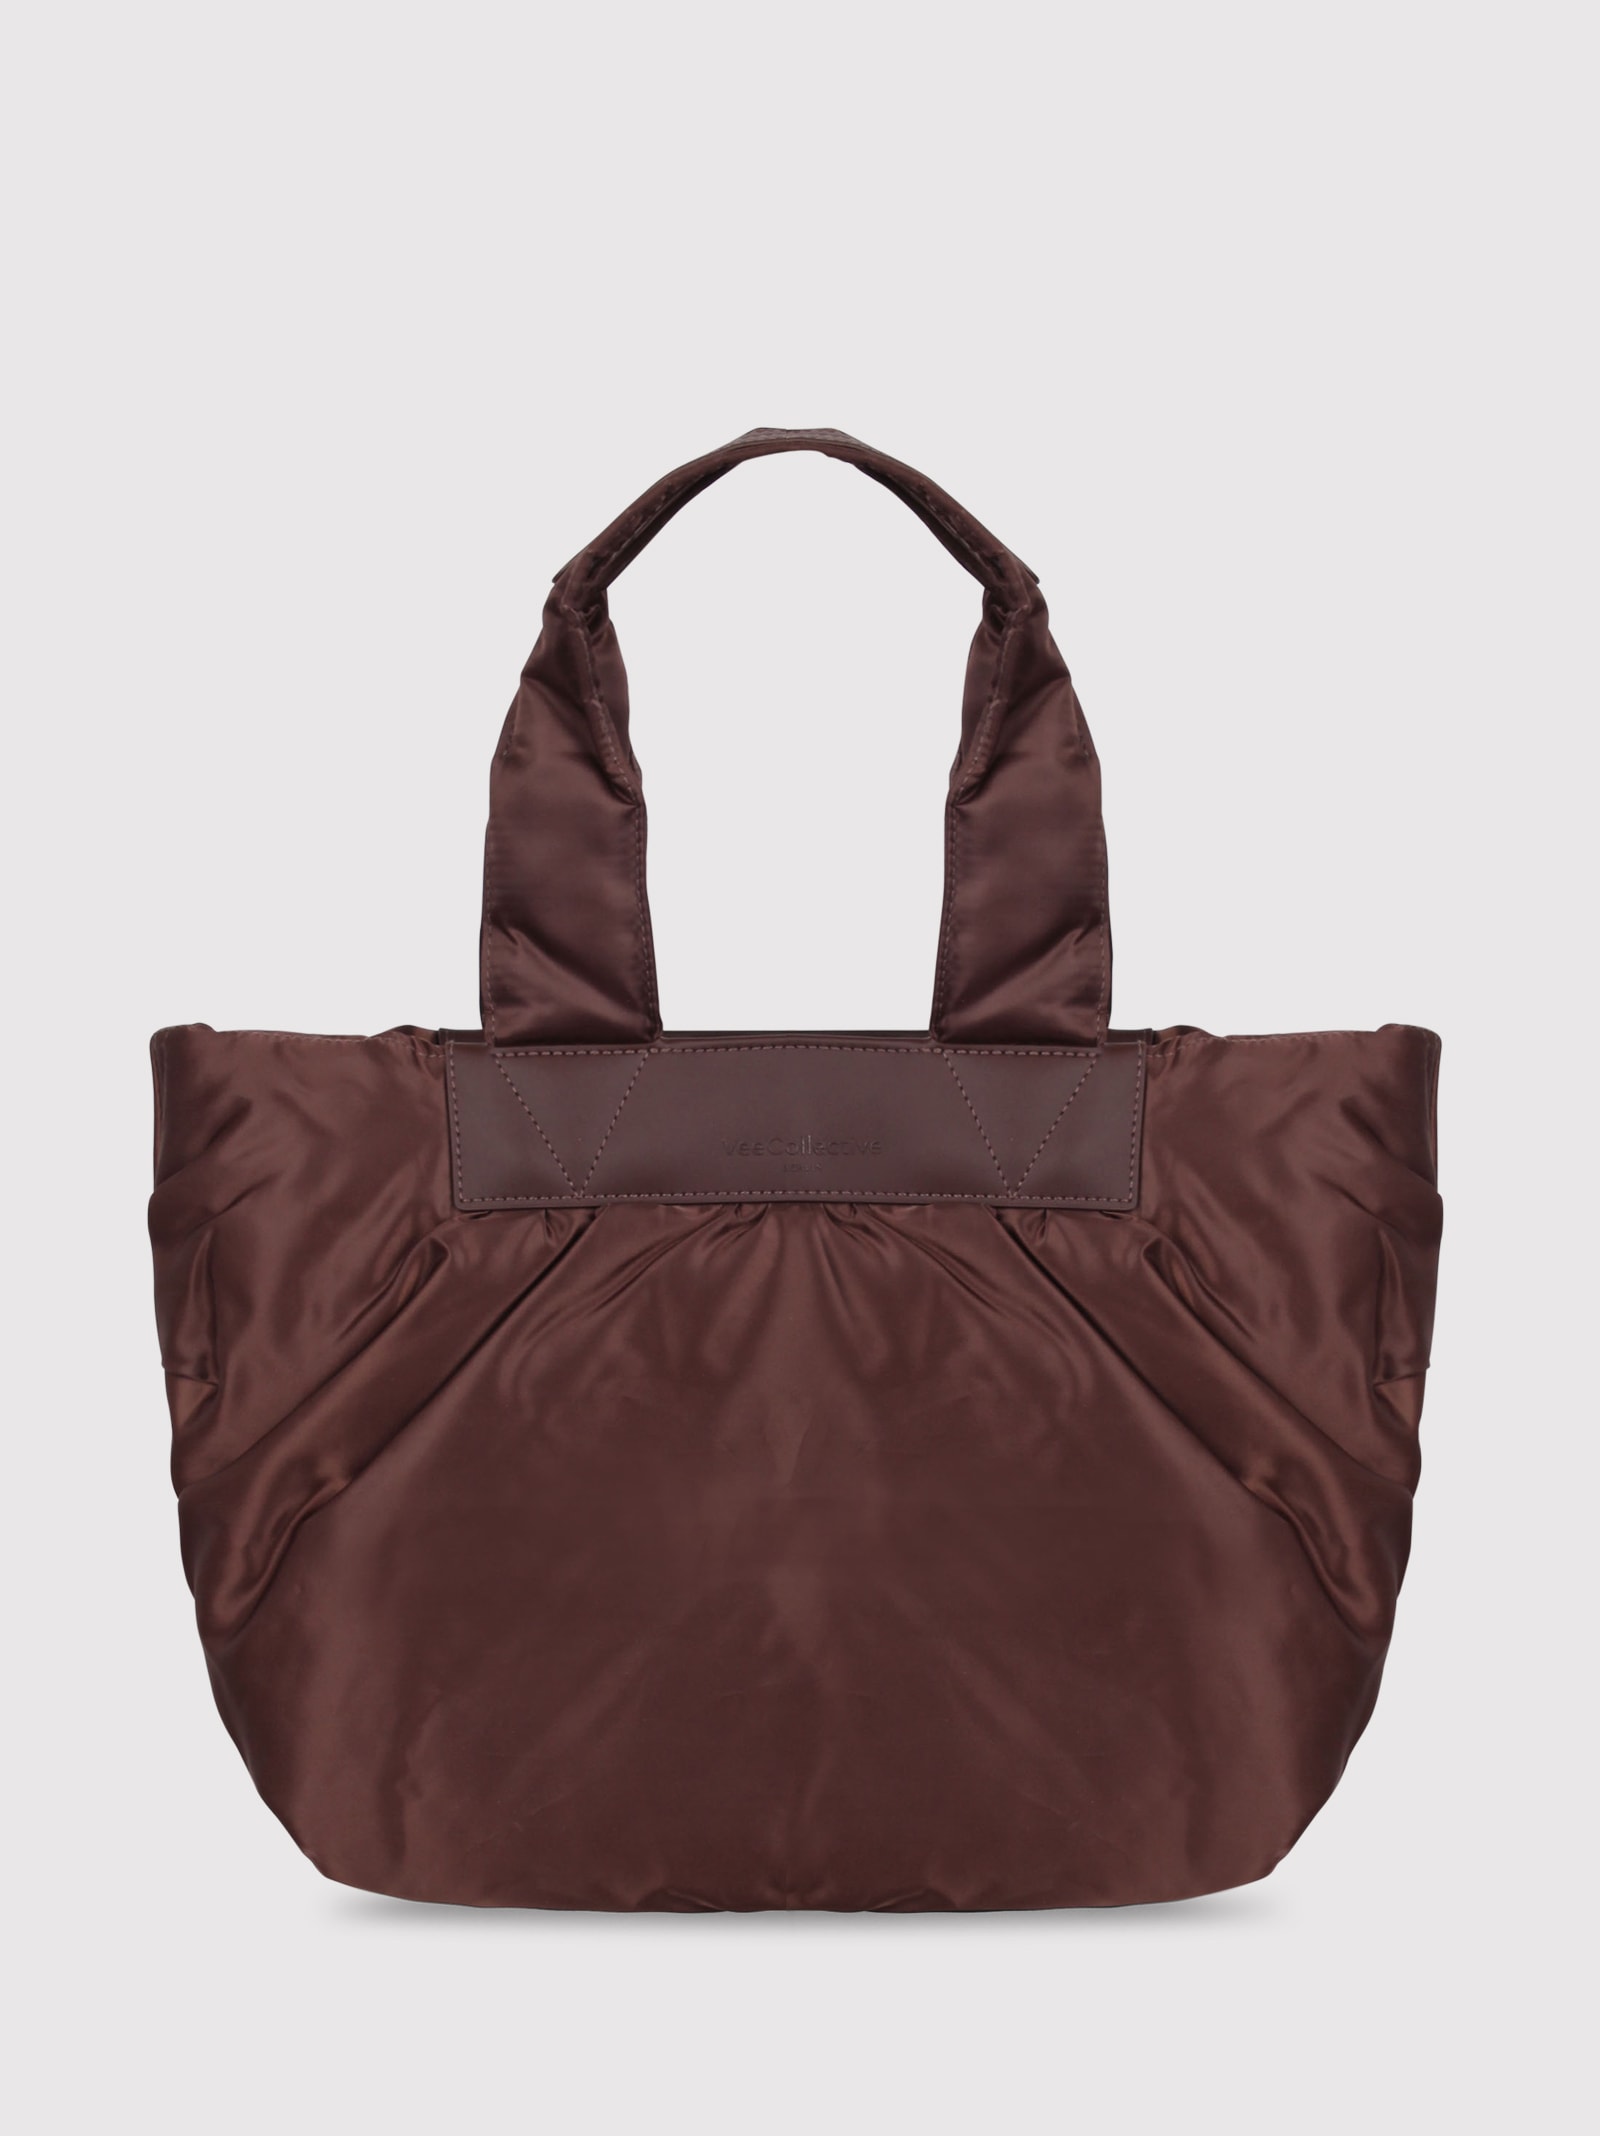 Veecollective Vee Collective Small Caba Tote Bag In Brown